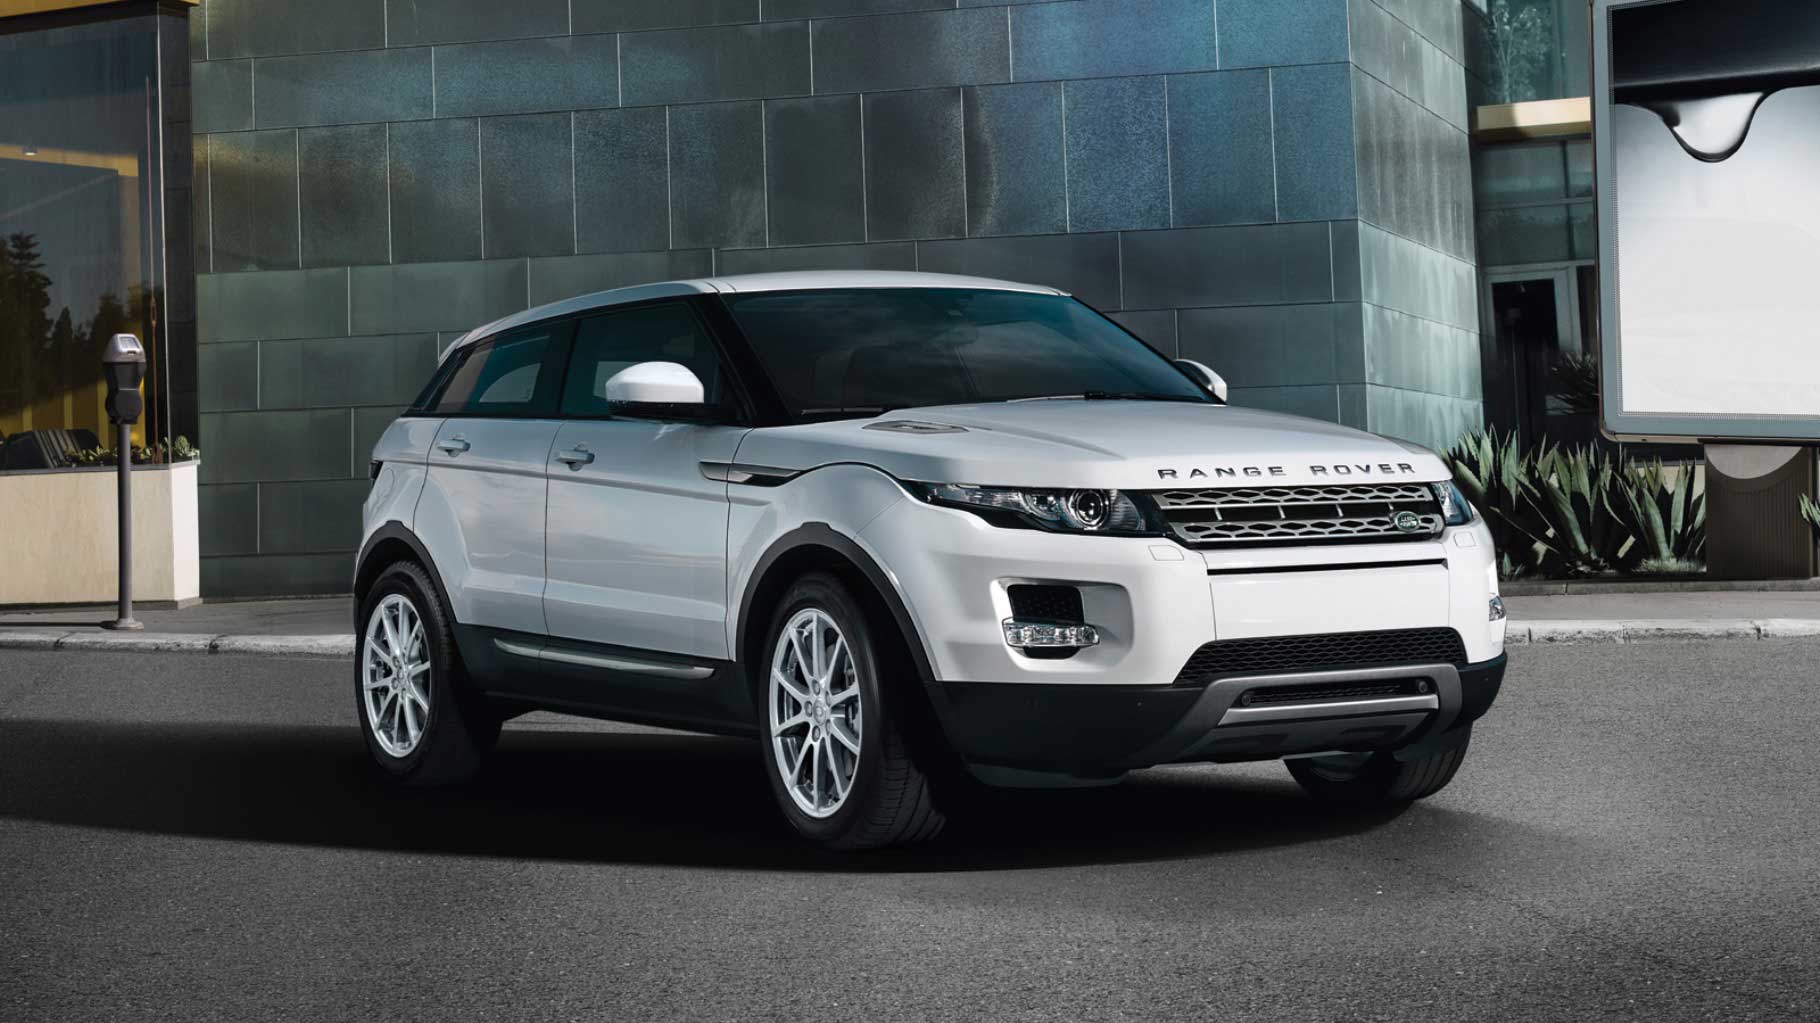 LAND ROVER EVOQUE front angular view